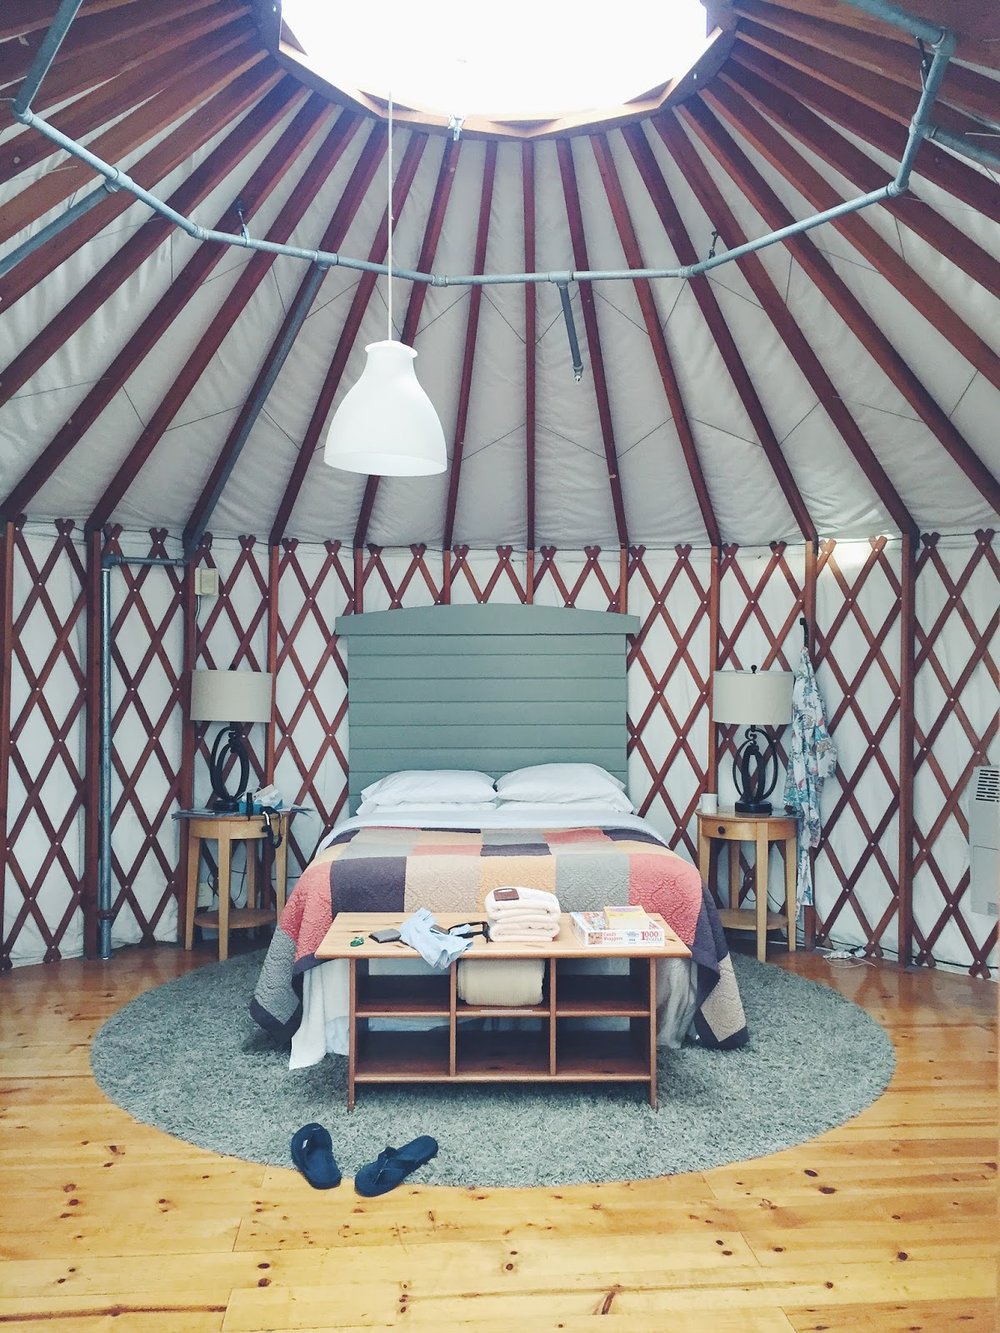 Yurt at Treebones, Where to stay in big Sur, What is a yurt